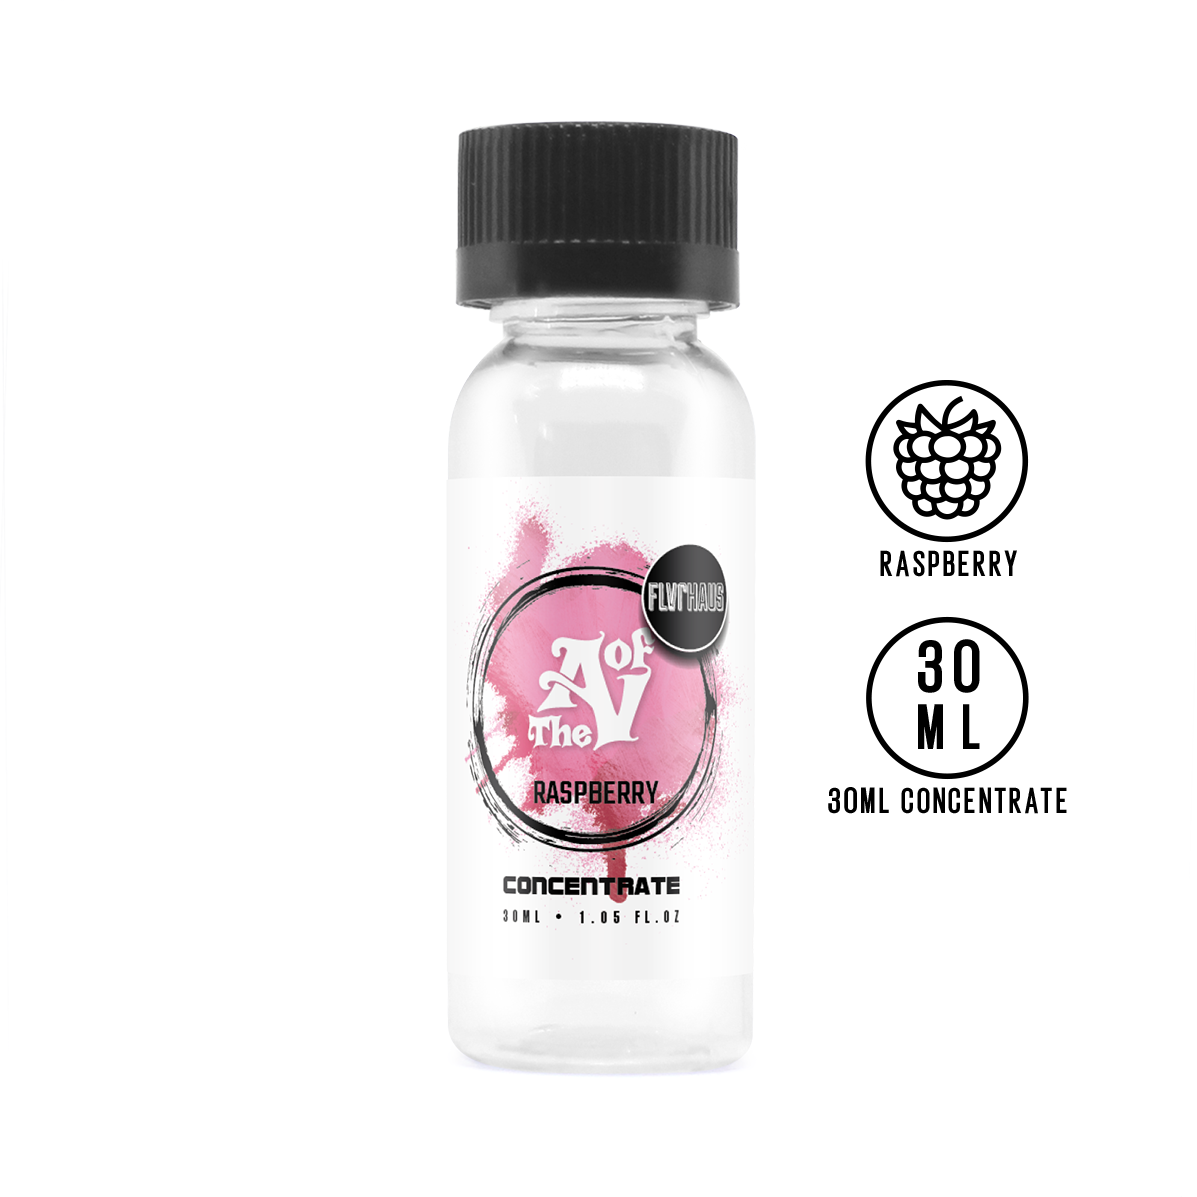 TAOV Basics Flvrhaus Raspberry Concentrate 30ml - The Ace Of Vapez